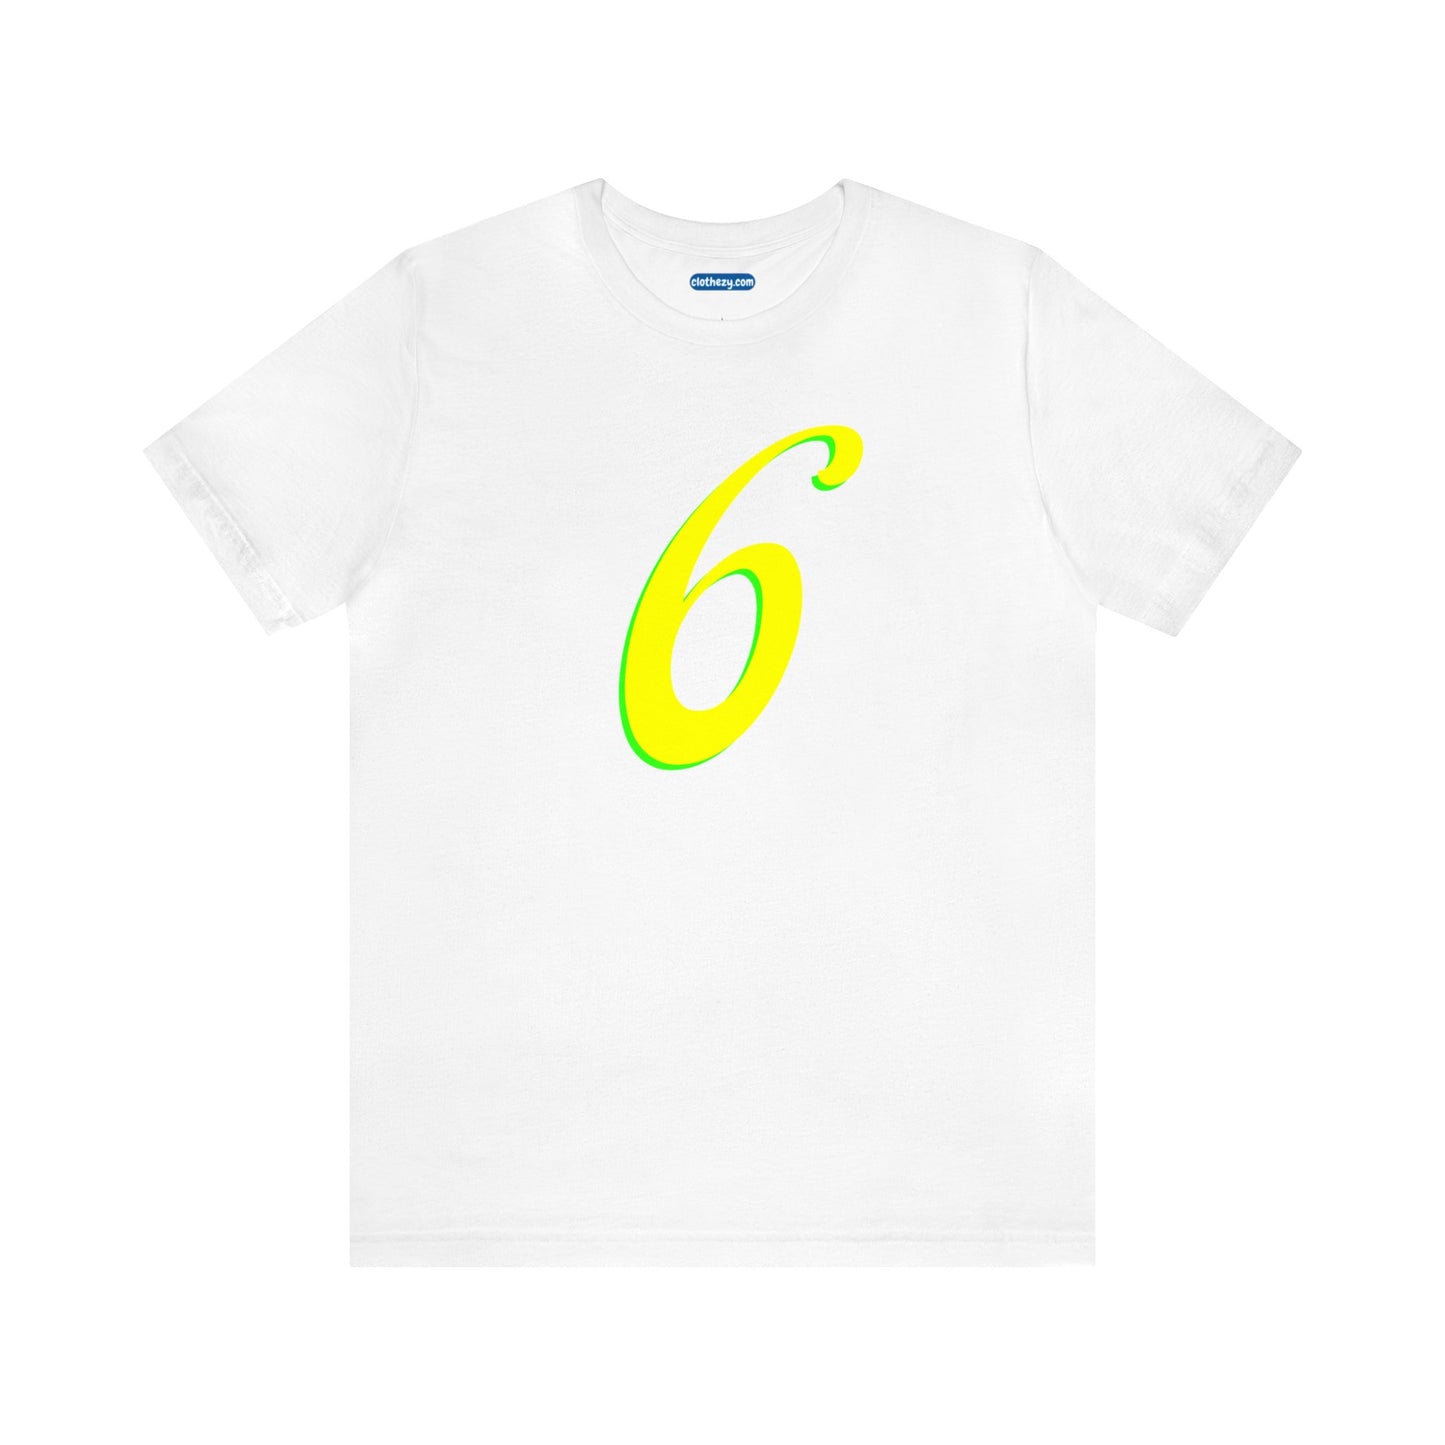 Number 6 Design - Soft Cotton Tee for birthdays and celebrations, Gift for friends and family, Multiple Options by clothezy.com in Olive Heather Size Small - Buy Now